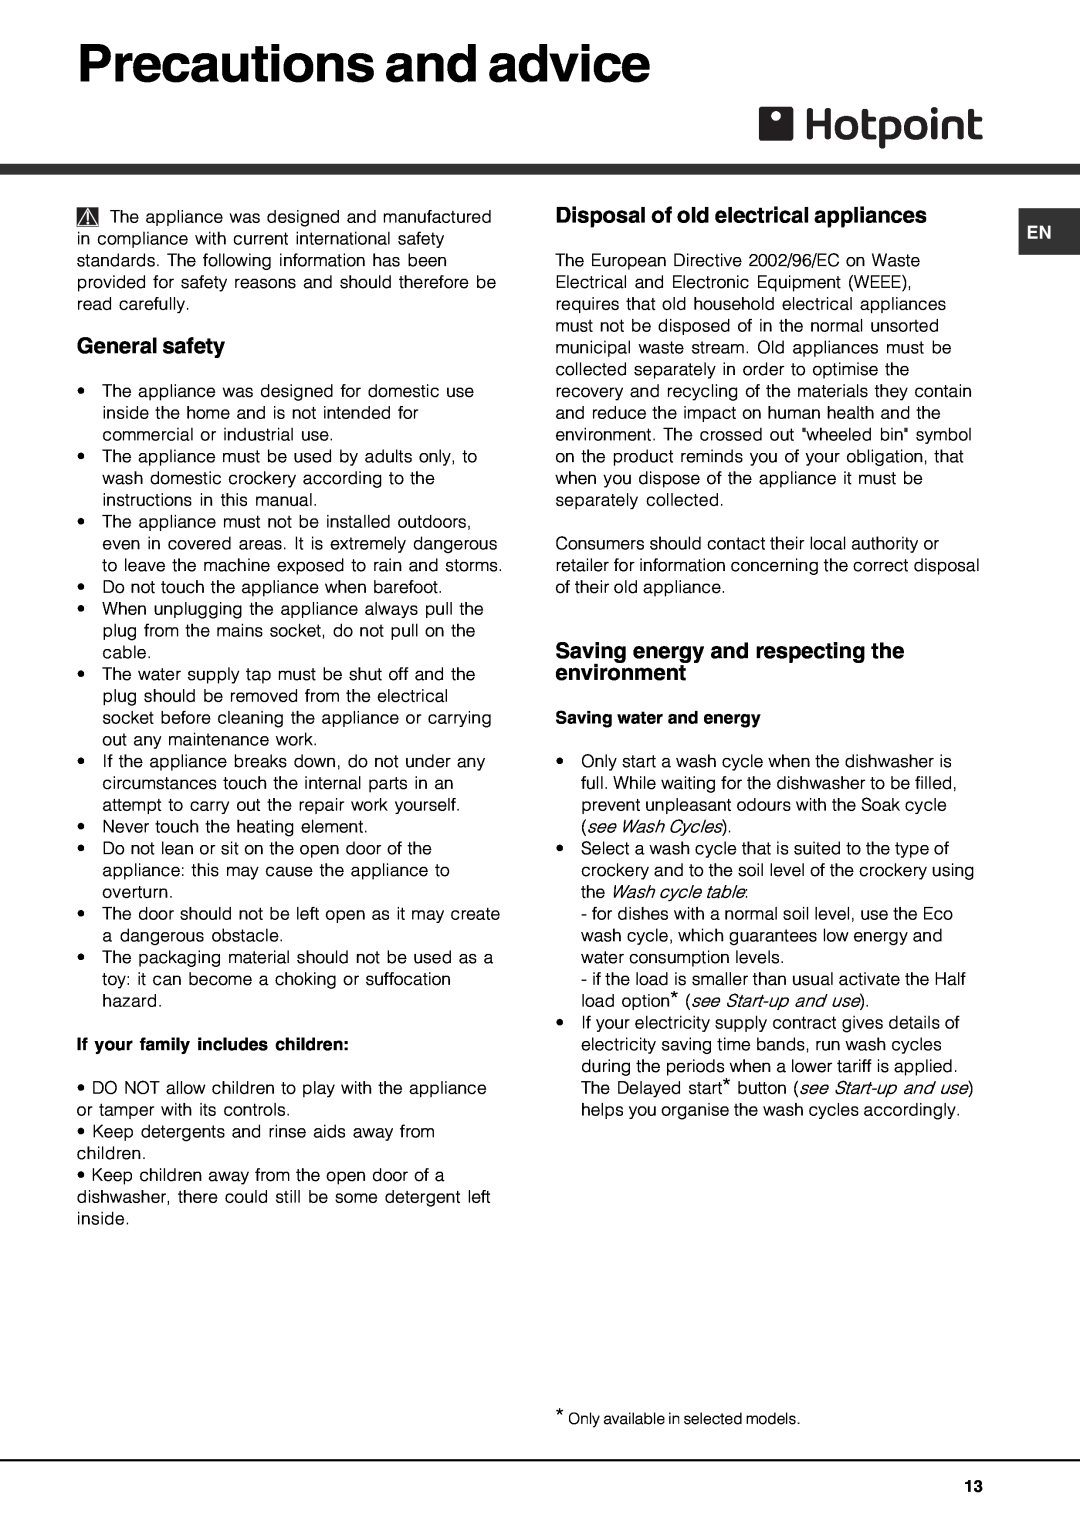 Hotpoint FDD 912 manual Precautions and advice, General safety, Disposal of old electrical appliances 